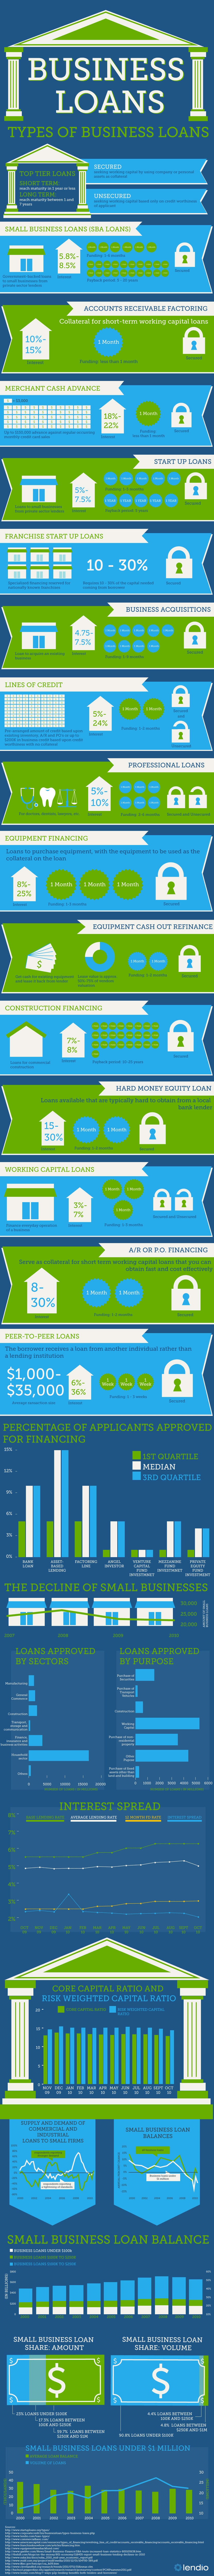 Compare Different Types of Business Loans Infographic